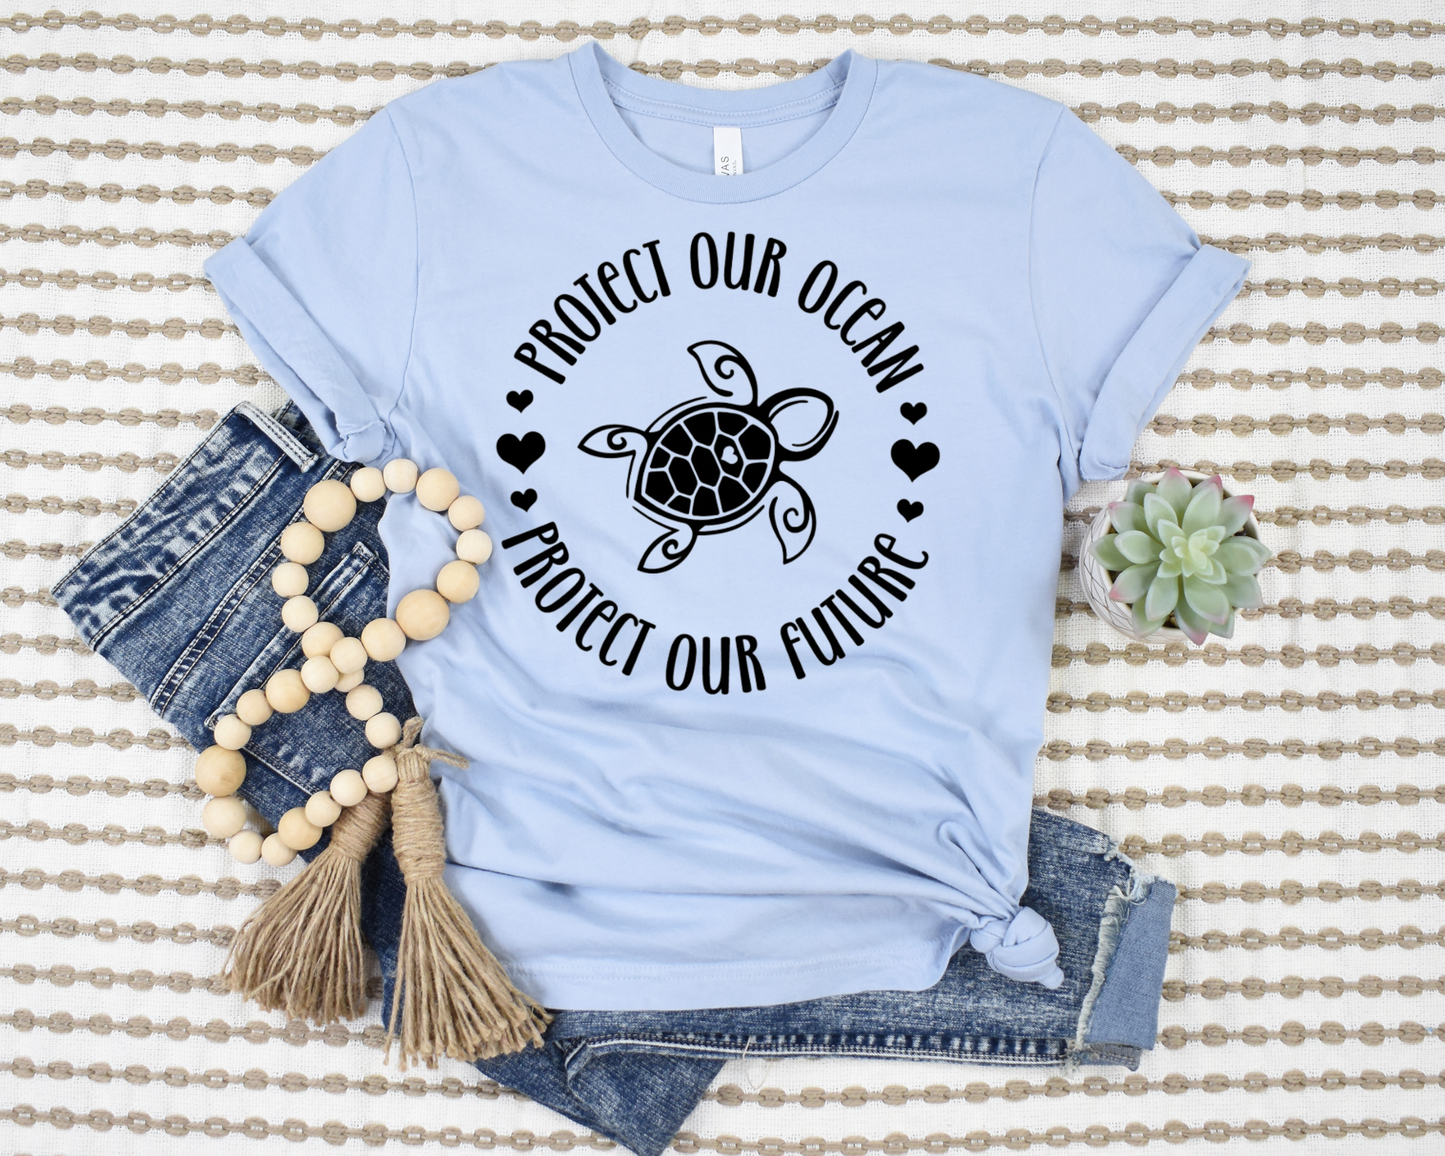 Protect Our Ocean T-Shirt